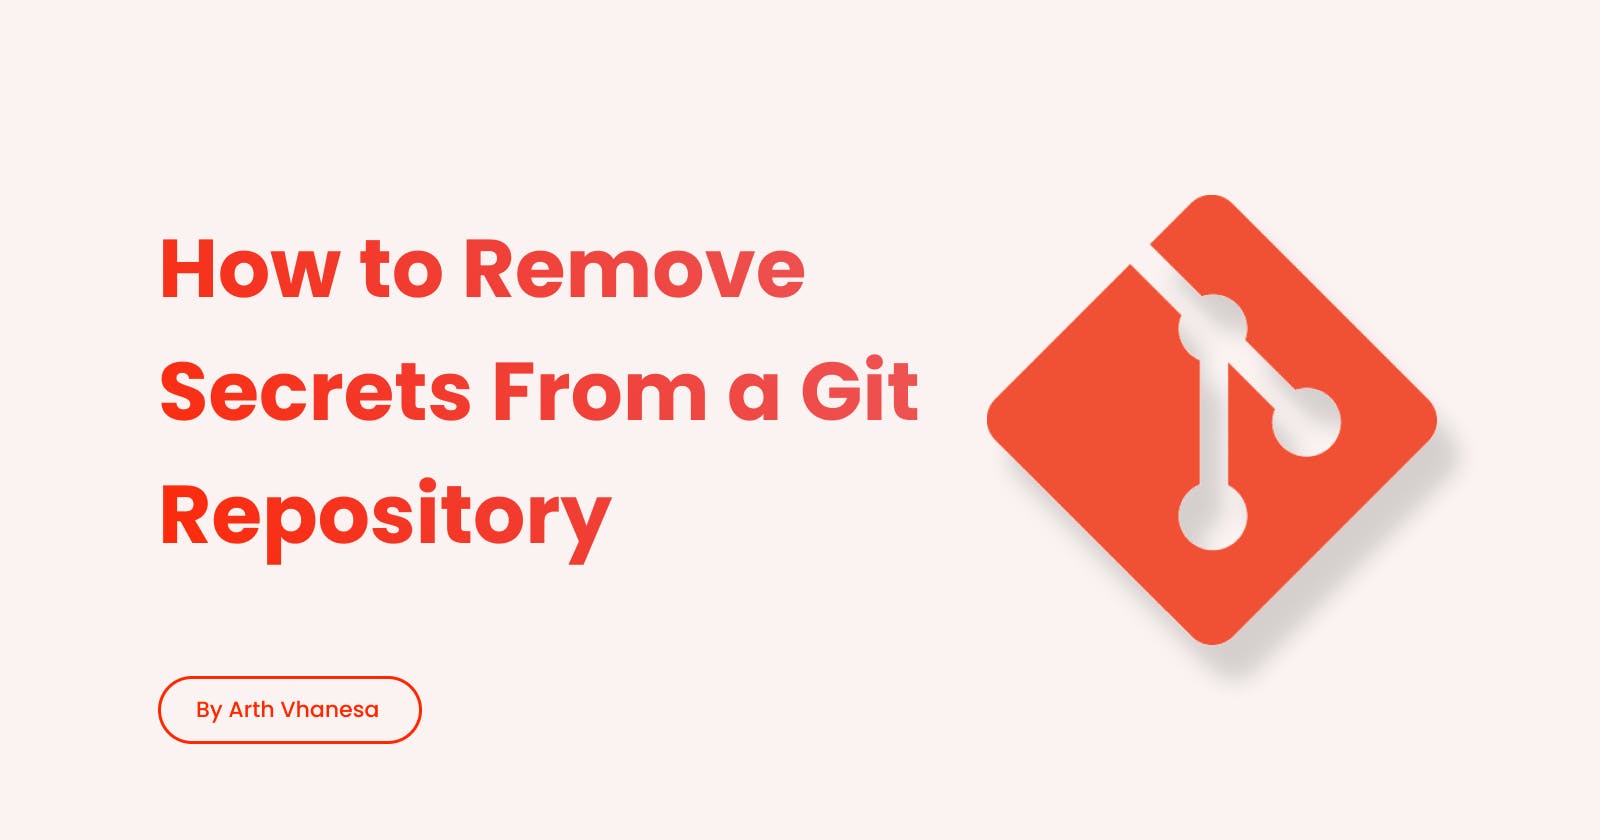 How to Remove Secrets From a Git Repository